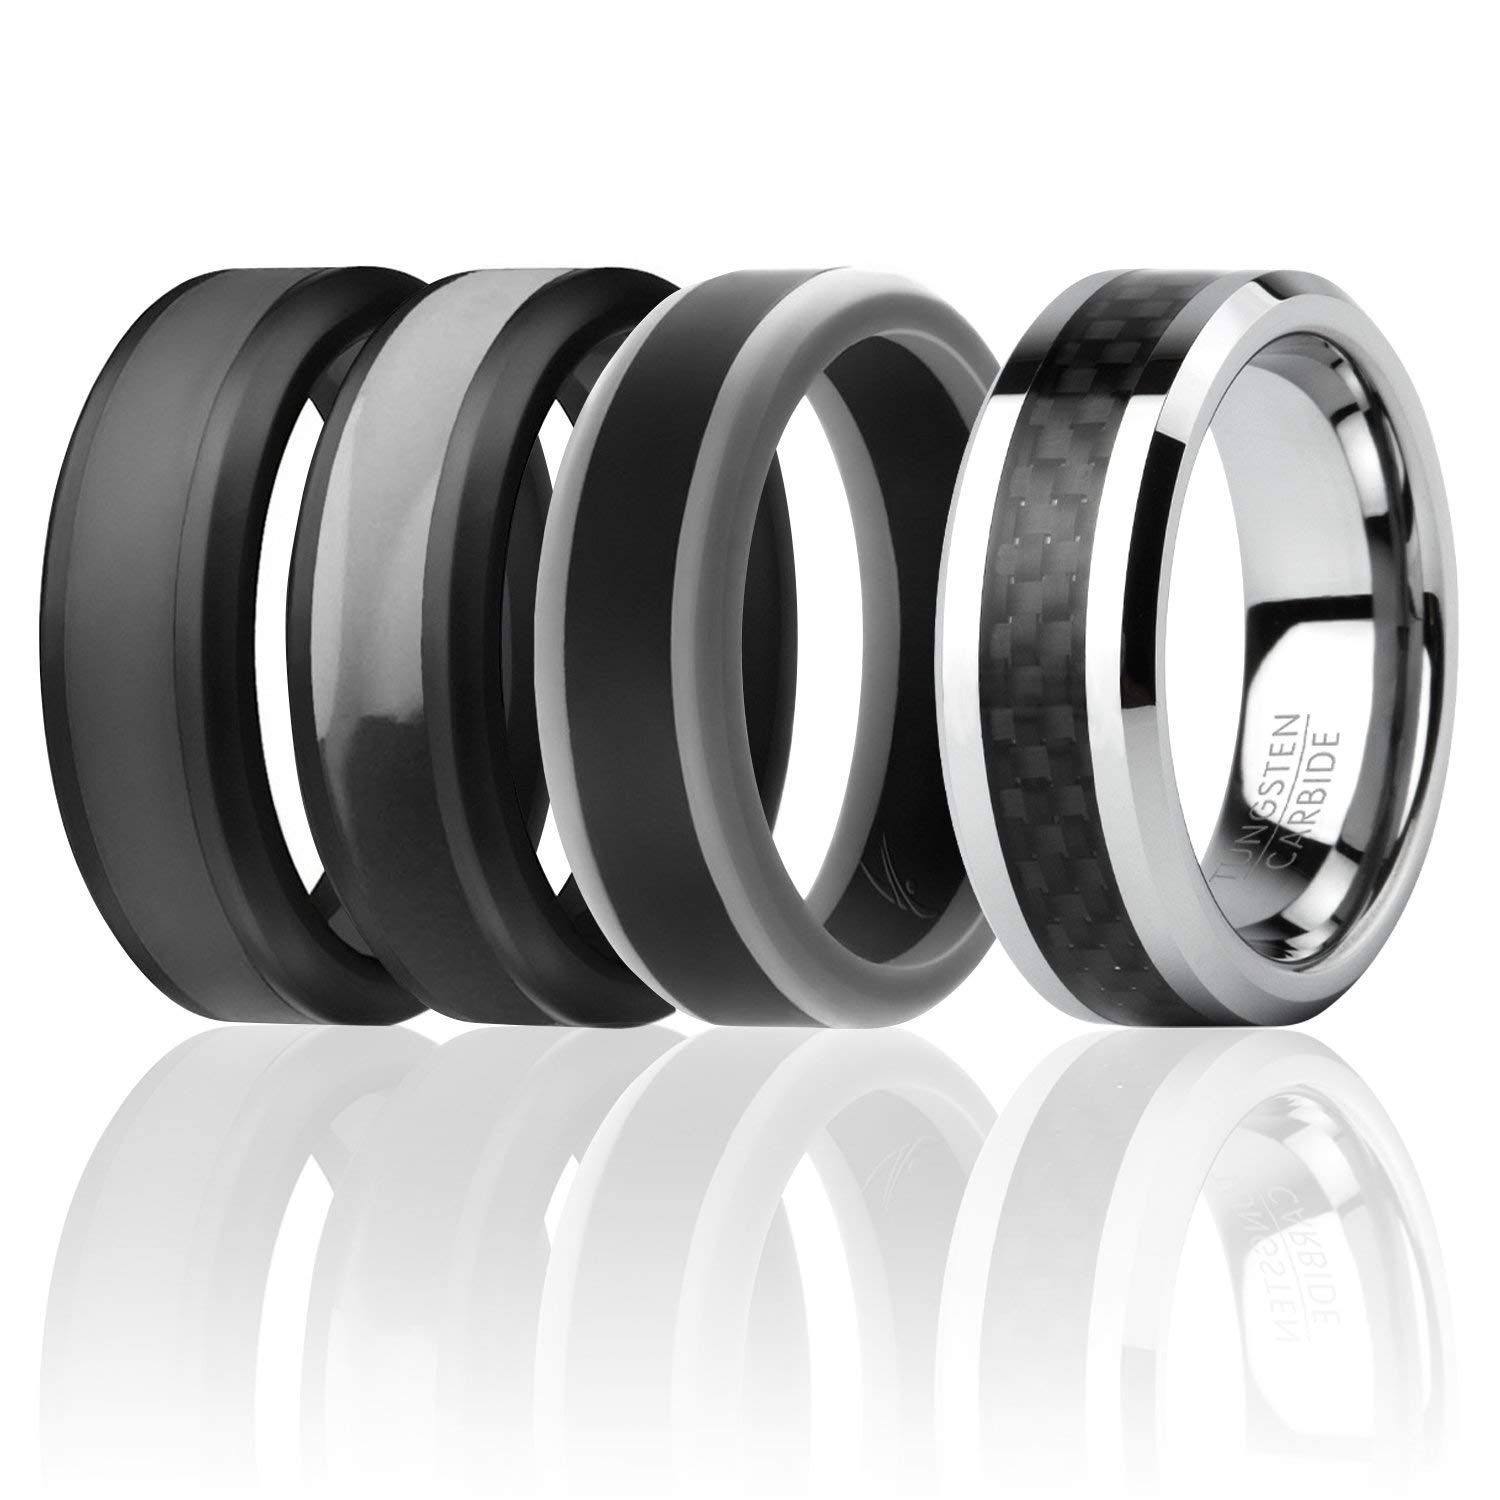 4 Pack - Roq Silicone Men Wedding Bands - Full Cycle Carbon 8